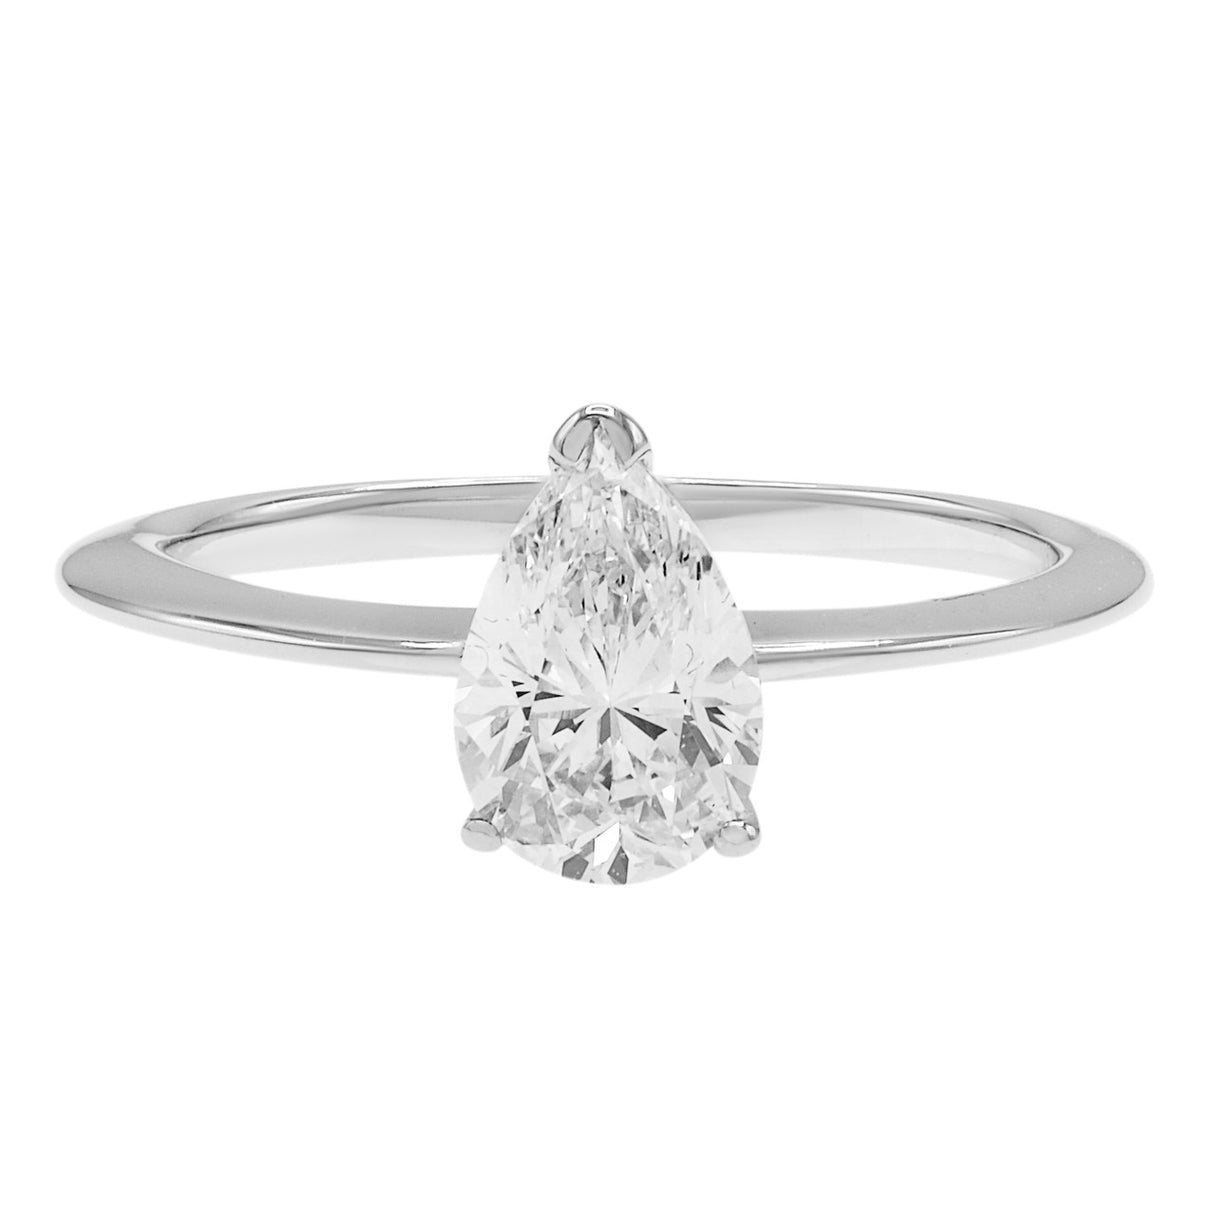 18K White Gold 0.68 Pear Shaped Diamond Solitaire Ring